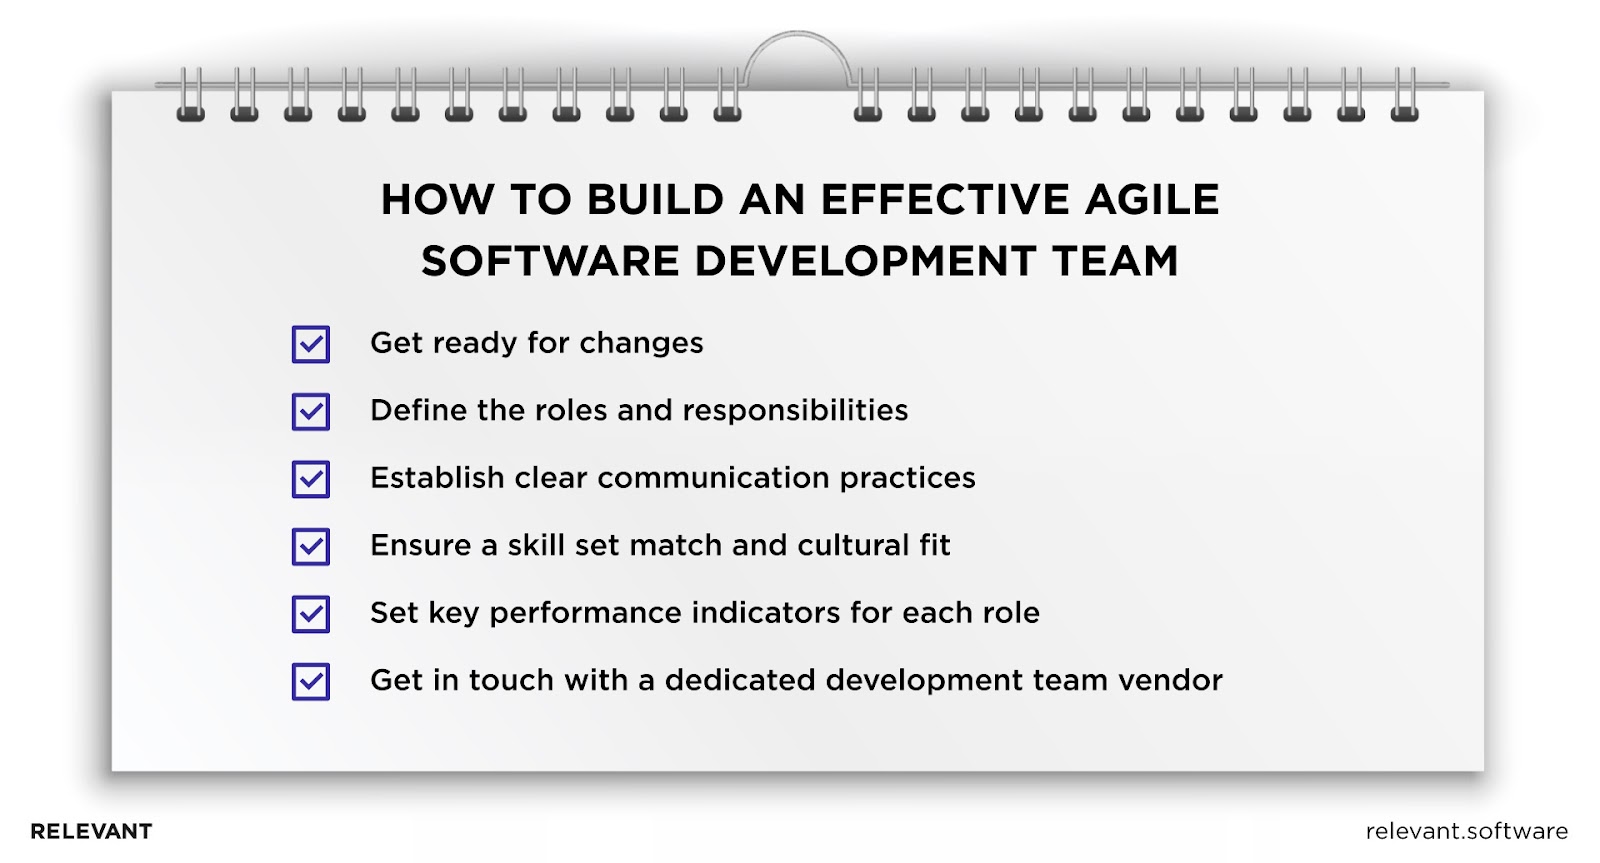 Agile software team structure key points